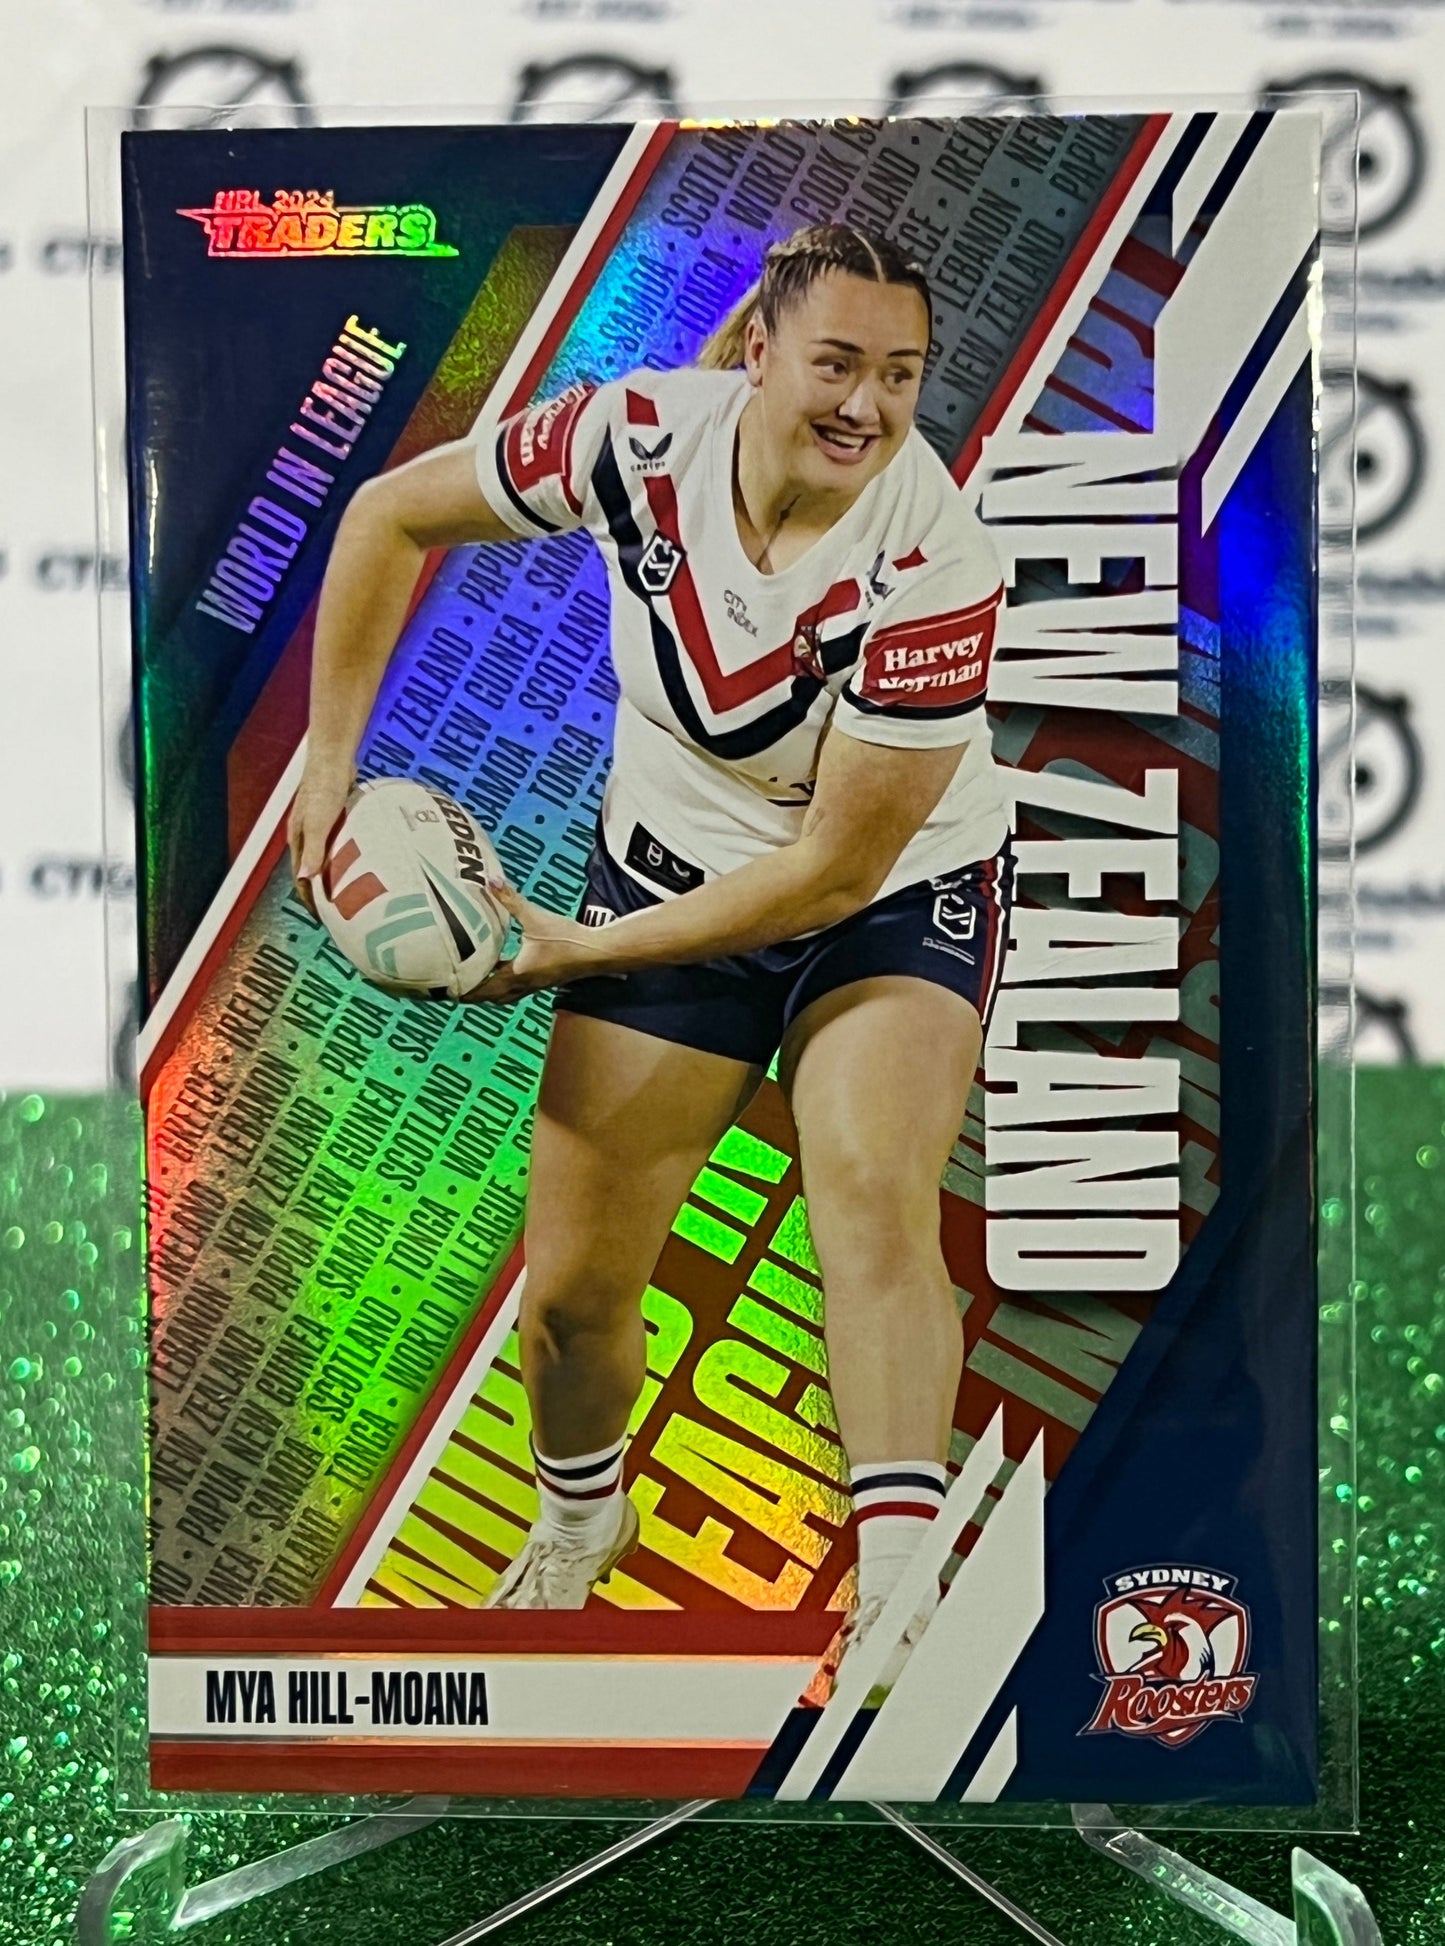 2024 NRL TRADERS MYA HILL-MOANA # WL 48/54 WORLD IN LEAGUE NEW ZEALAND SYDNEY ROOSTERS